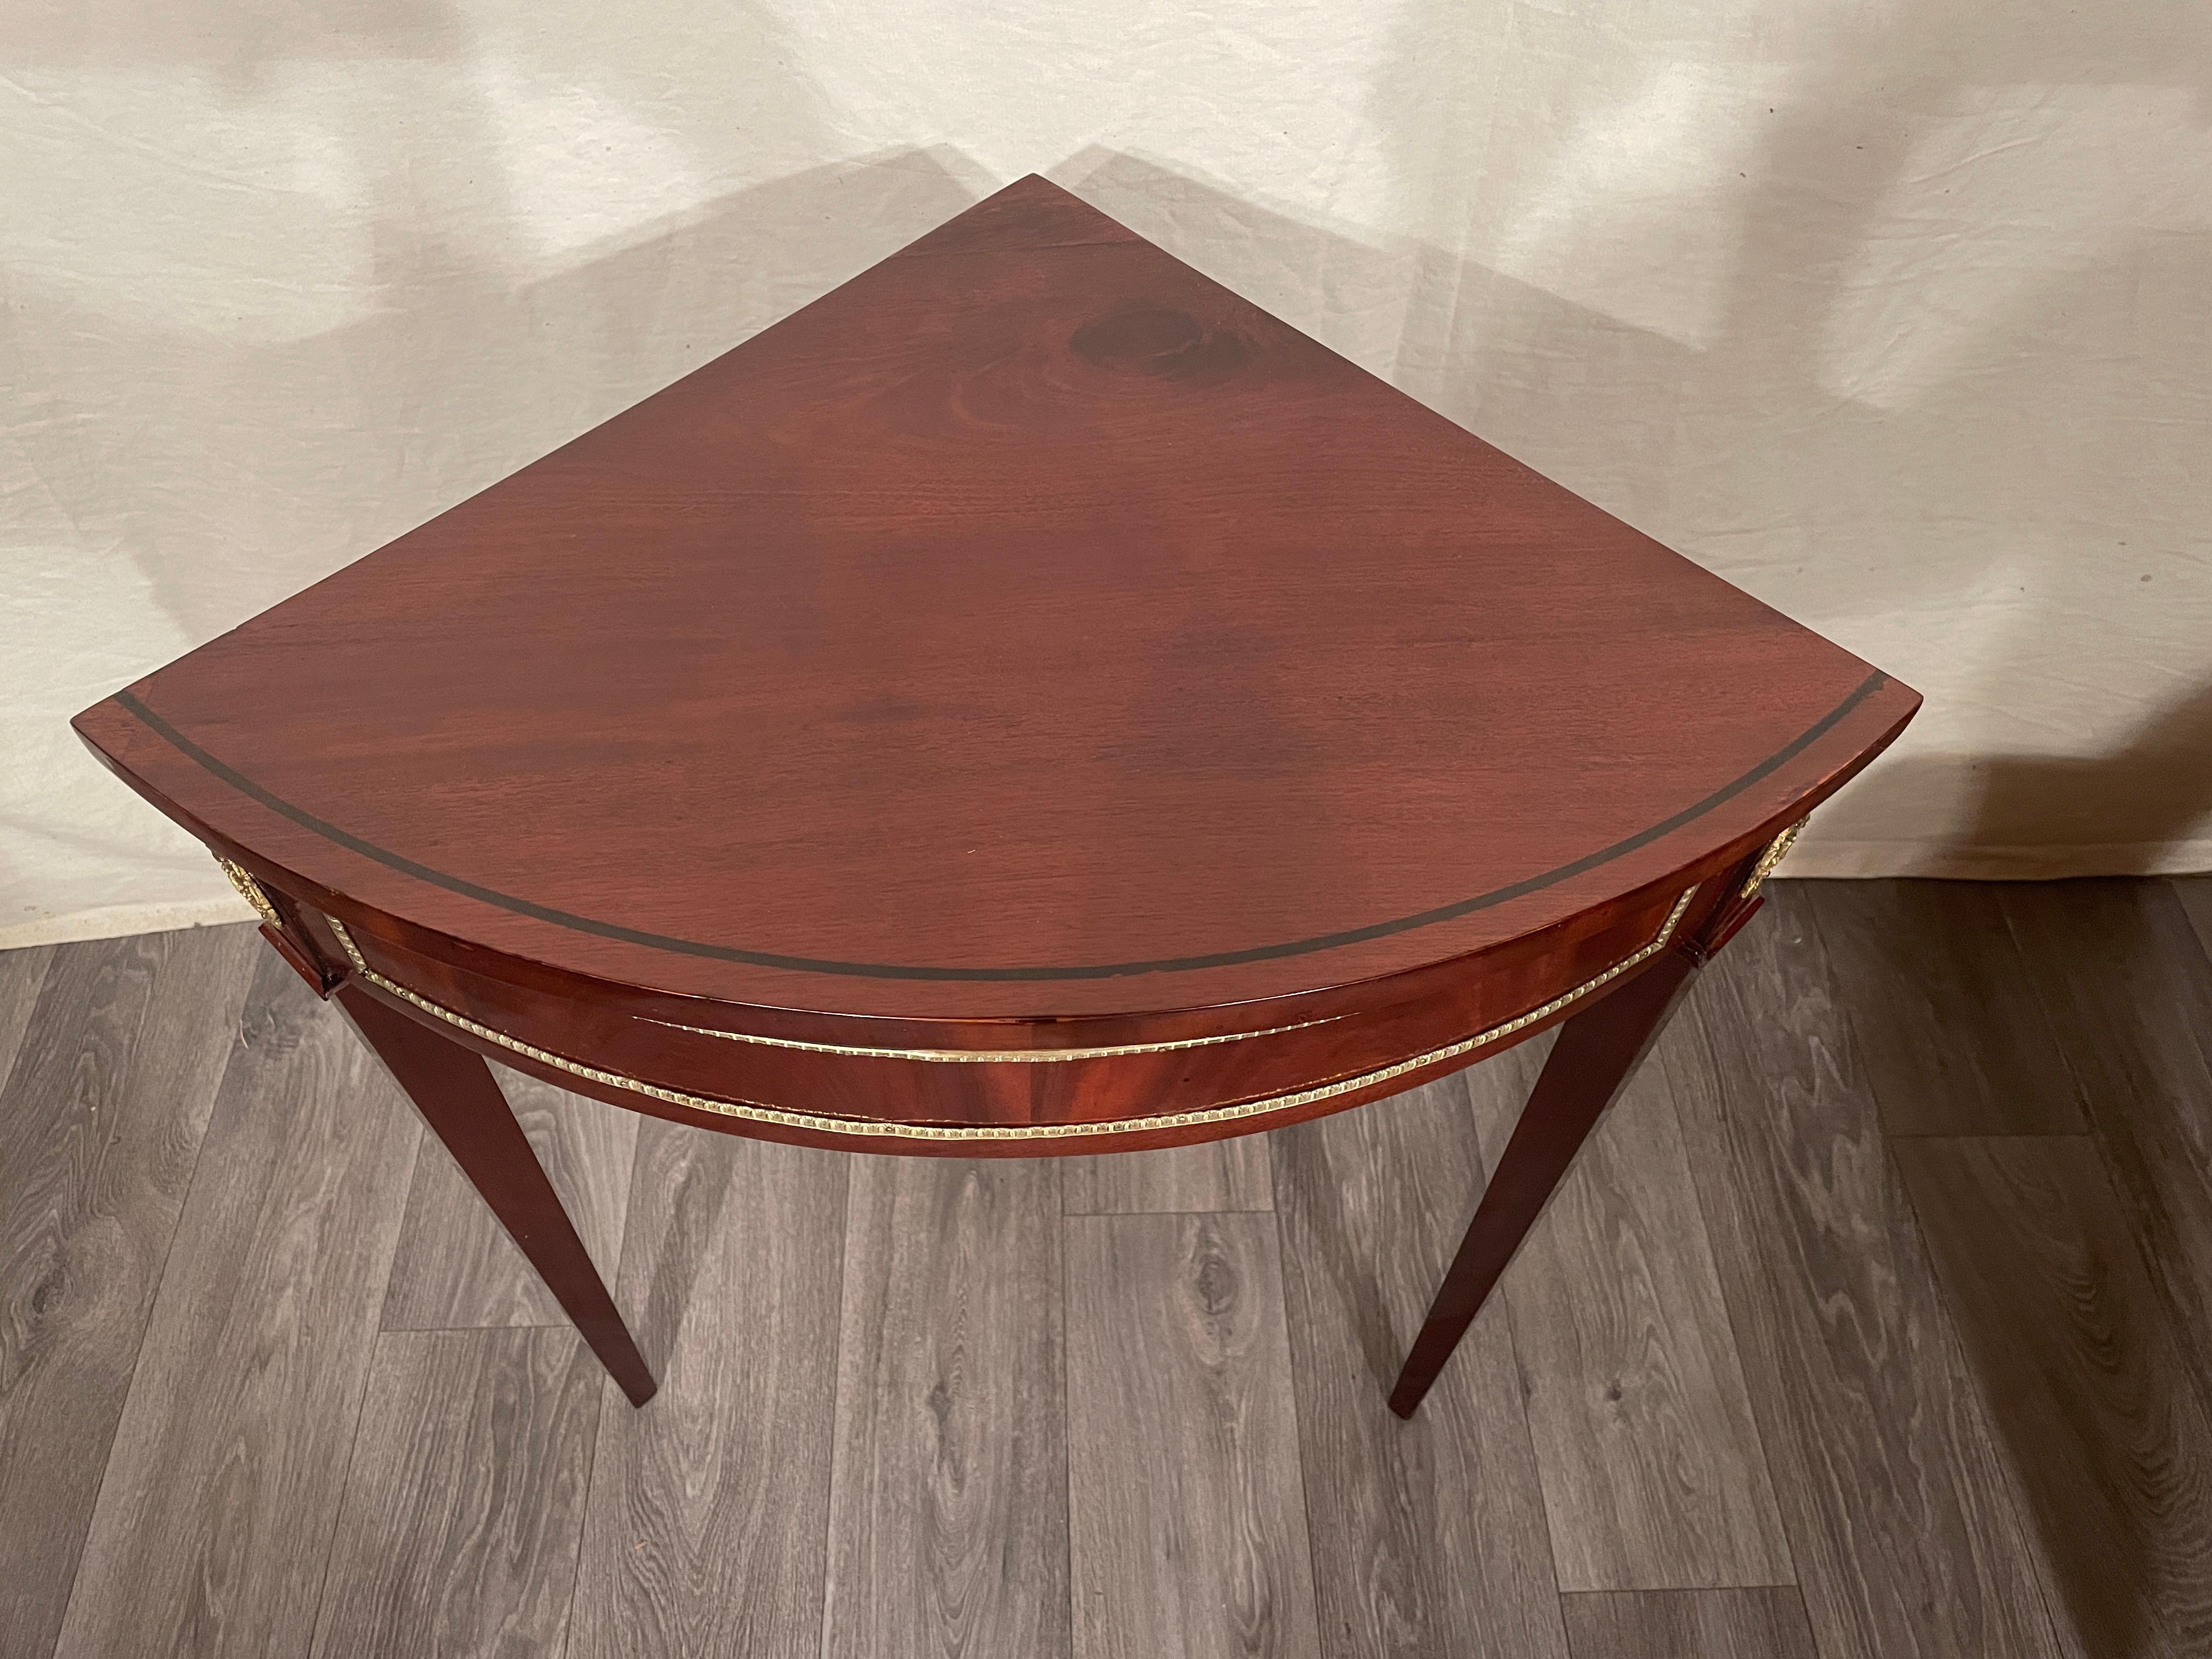 This elegant little Empire corner console table is embellished with mahogany veneer and pretty brass decorations. 
It is in very good, professionally refinished condition. The perfect little piece for any corner of your house or apartment.